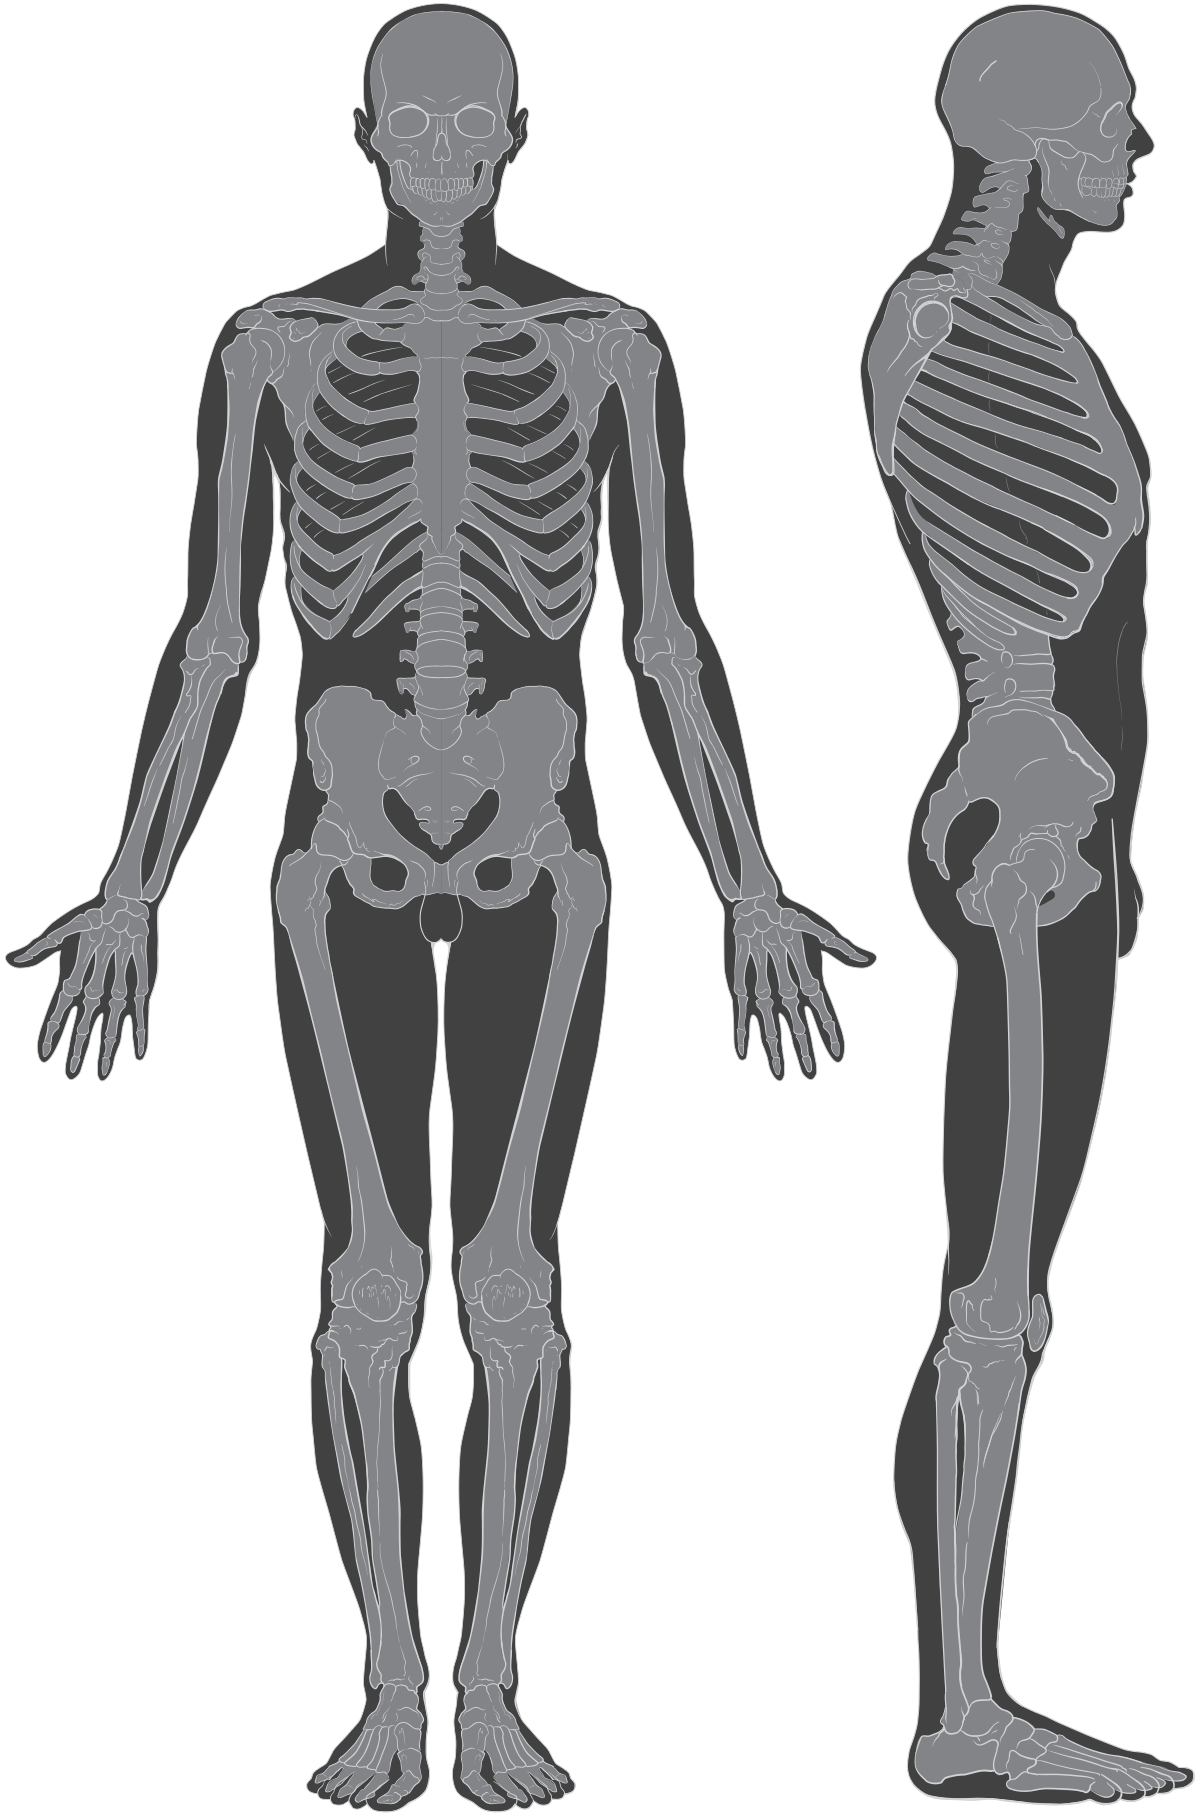 Download File:Skeleton whole body ant lat views.svg - Wikimedia Commons